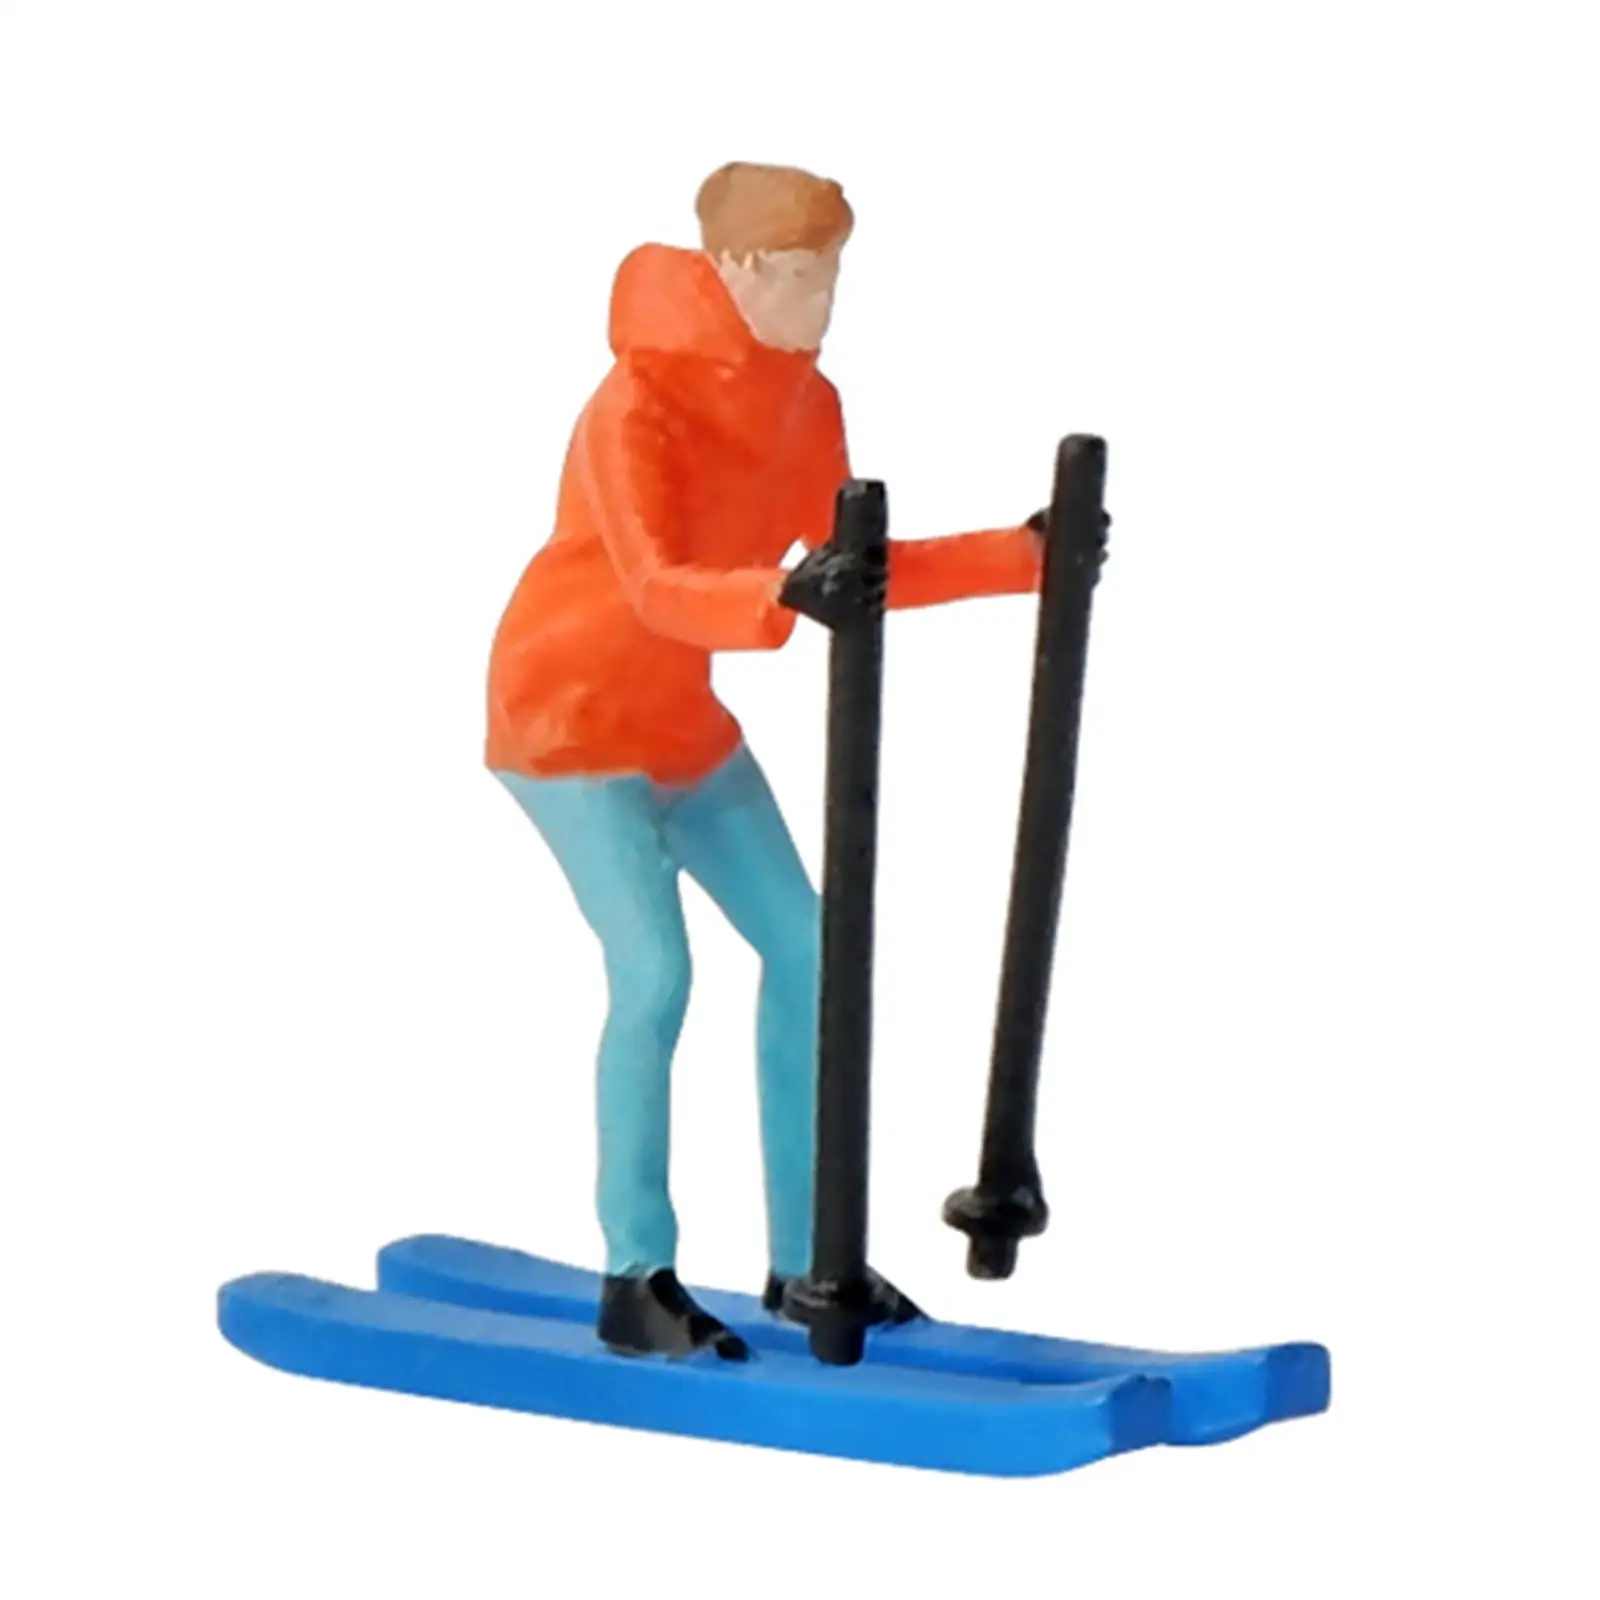 1:64 Scale Skiing Model People Figures Skier Figures for Sand Table Dollhouse Layout Decor